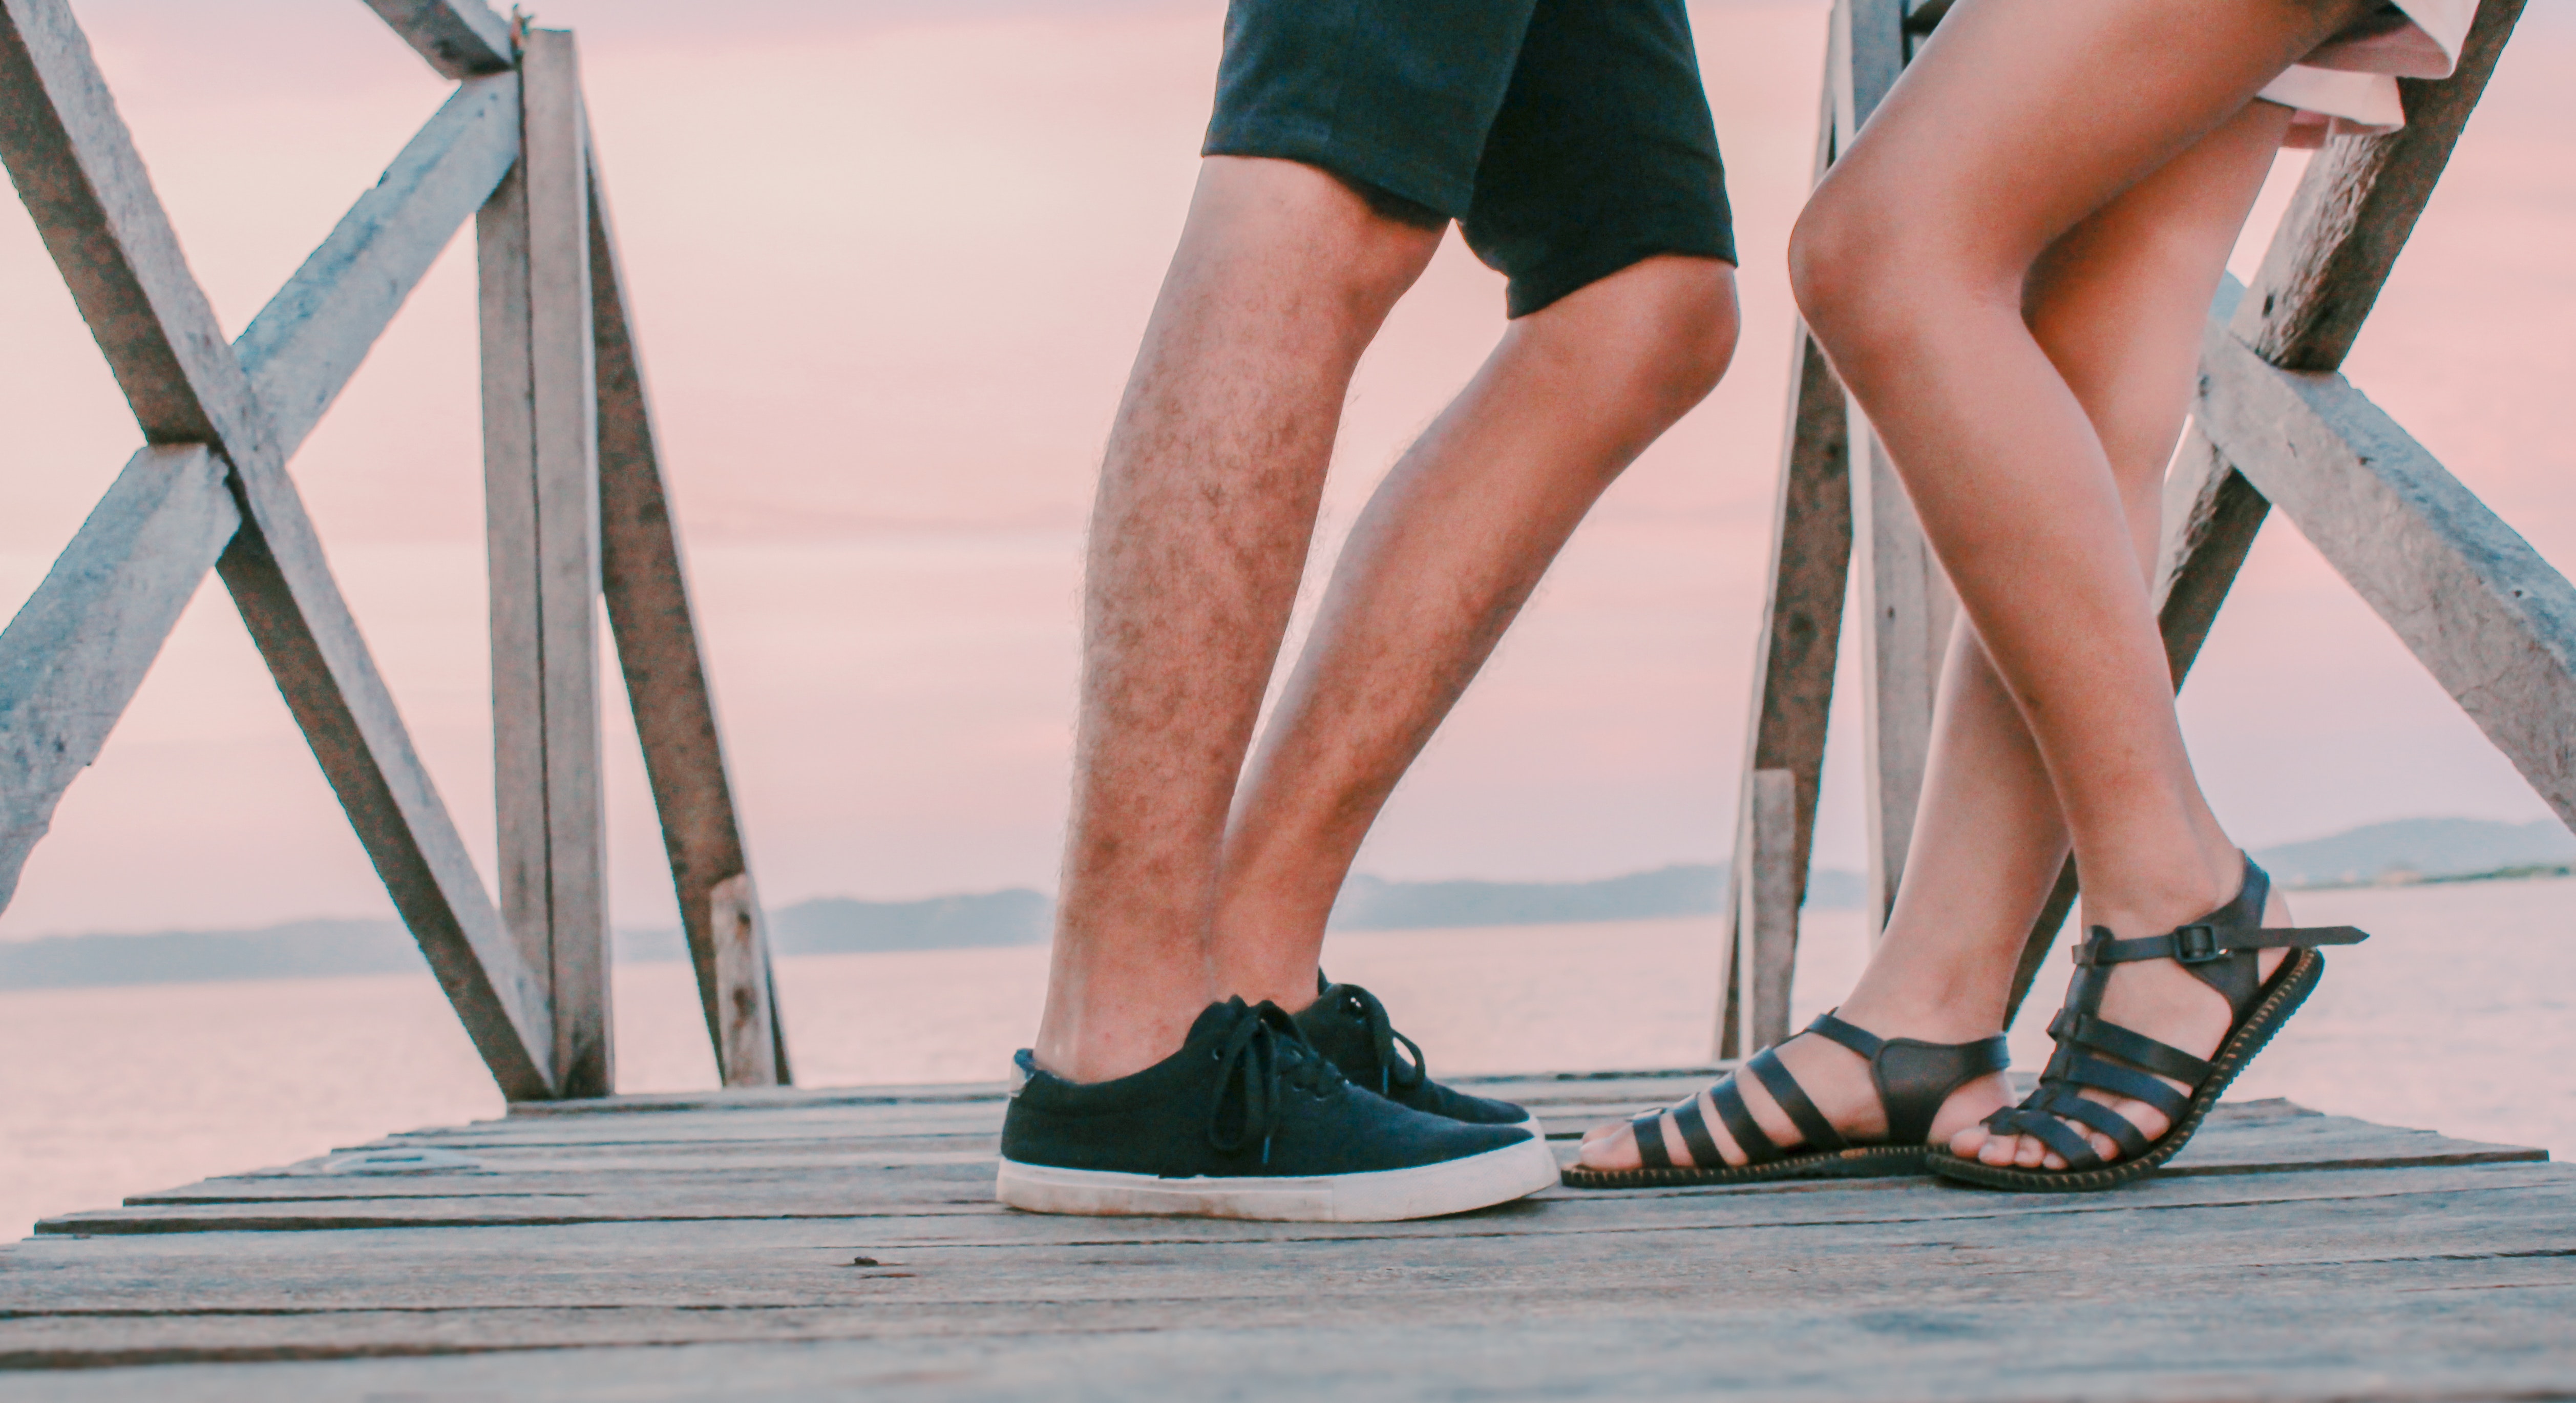 Man in Black Low-top Sneakers Leaning Towards Woman in Black Gladiator Flat Sandals on Dock, Adult, Recreation, Woman, Water, HQ Photo